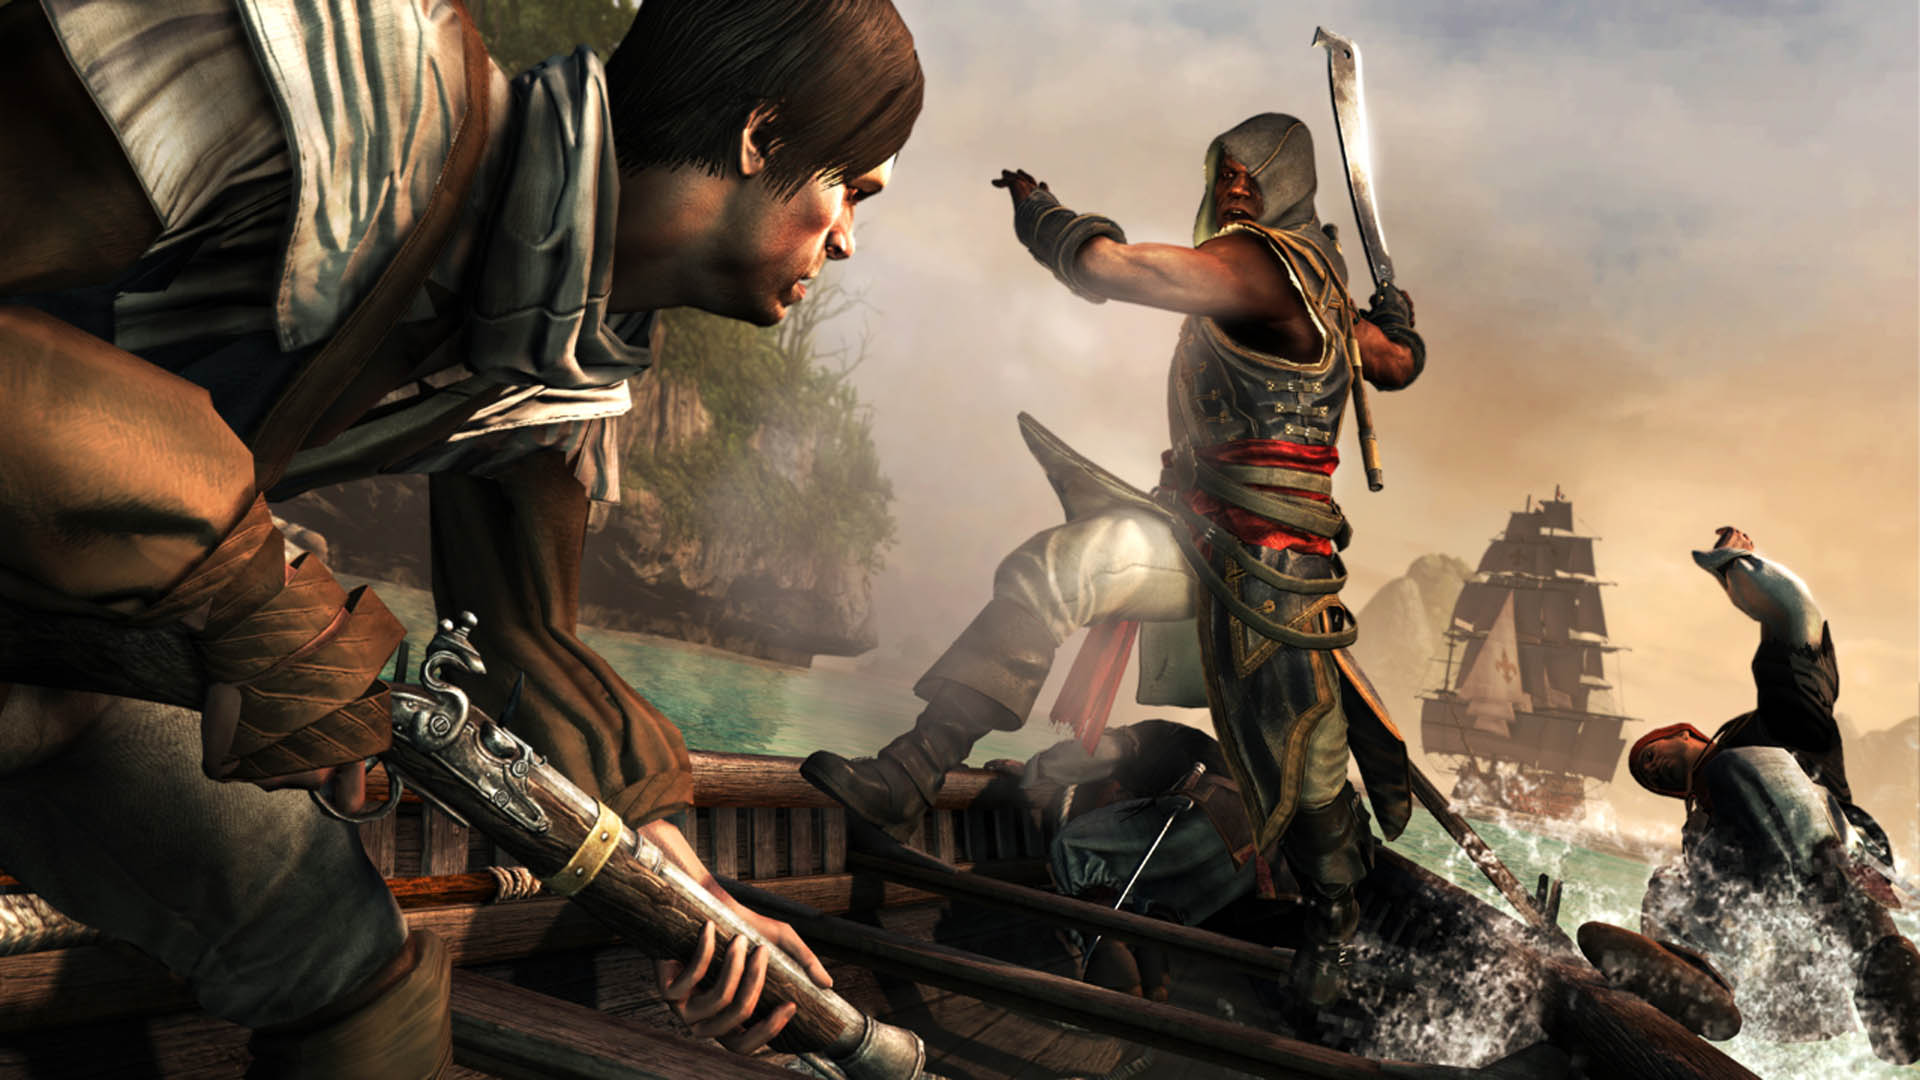 Save 60% on Assassin's Creed Freedom Cry on Steam